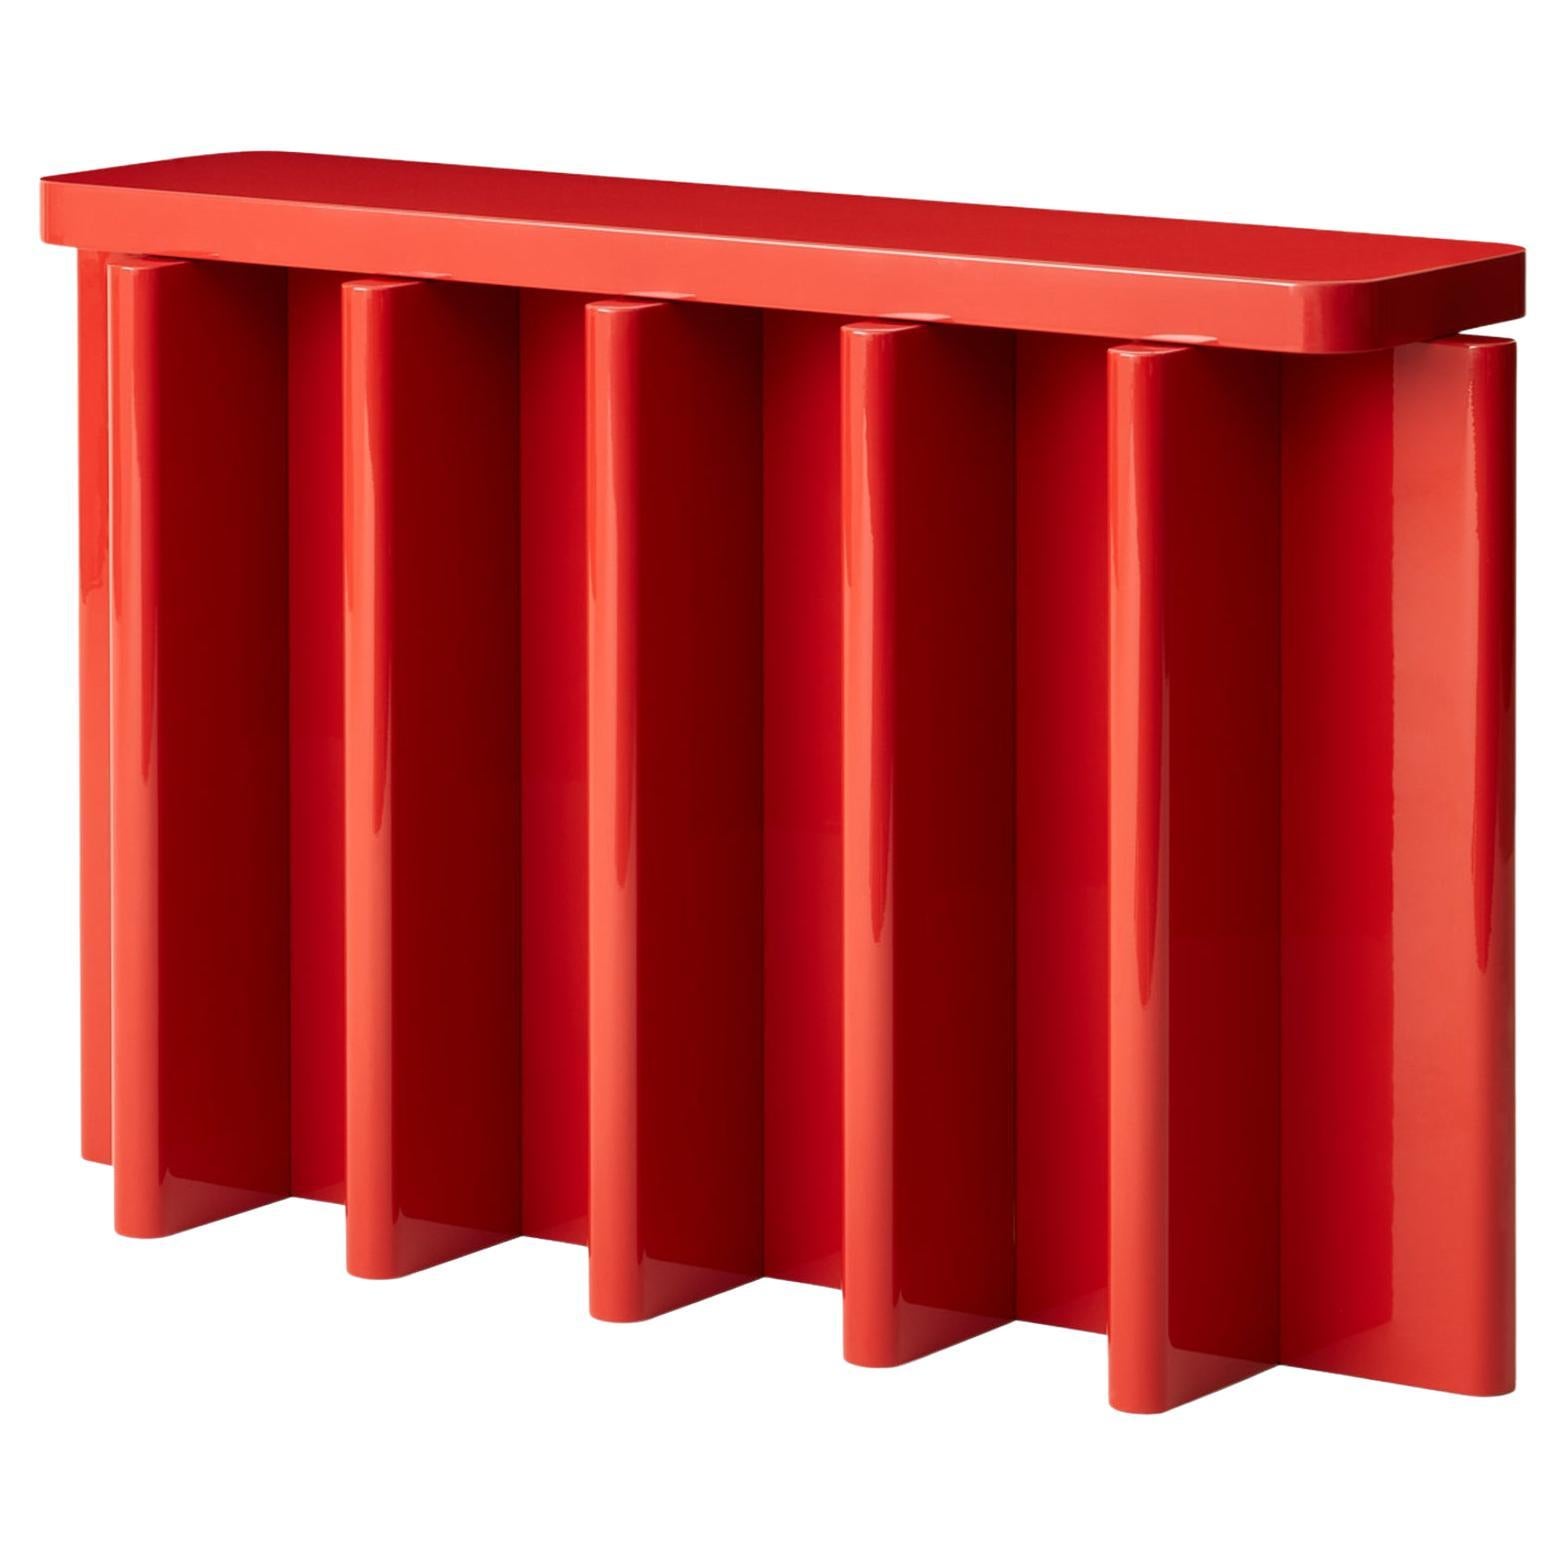 Red Spina C5.1 Console Table by Cara Davide For Sale